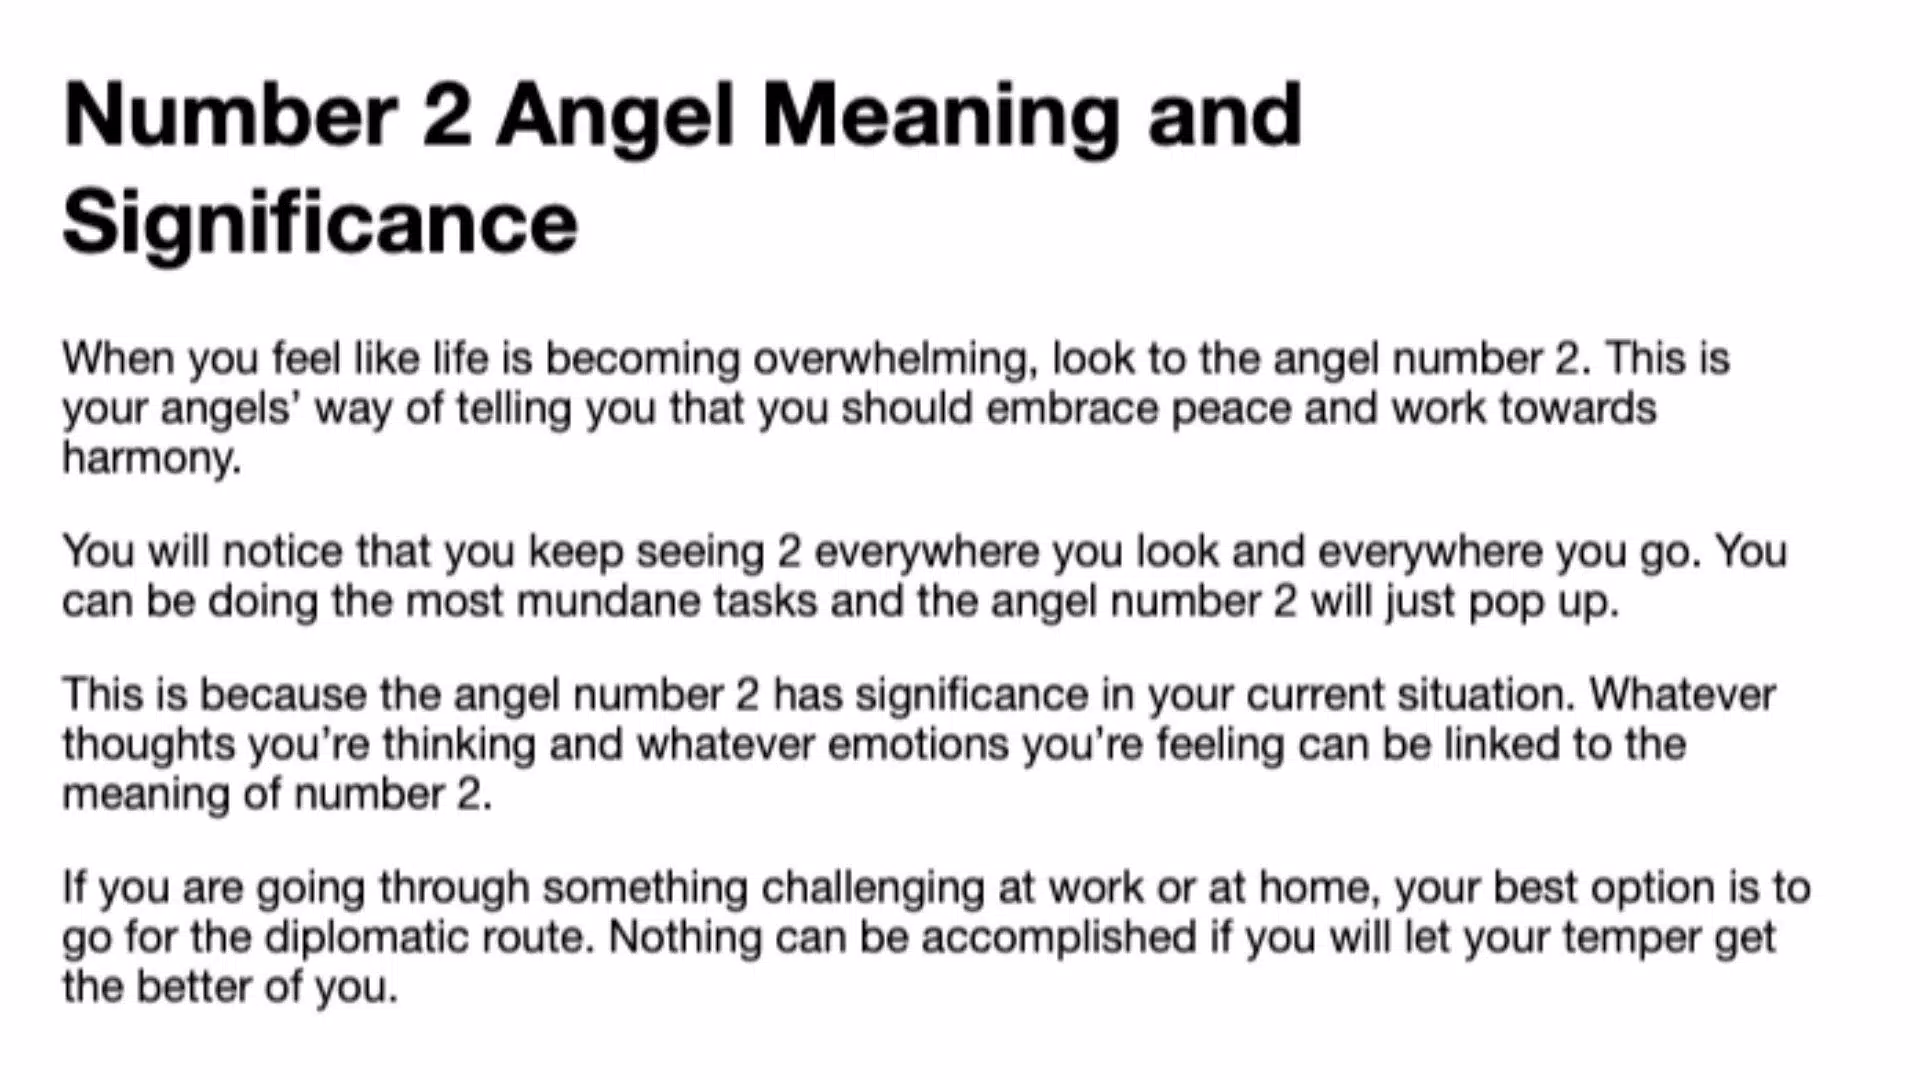 Number 2 Angel Meaning and Significance APK للاندرويد تنزيل